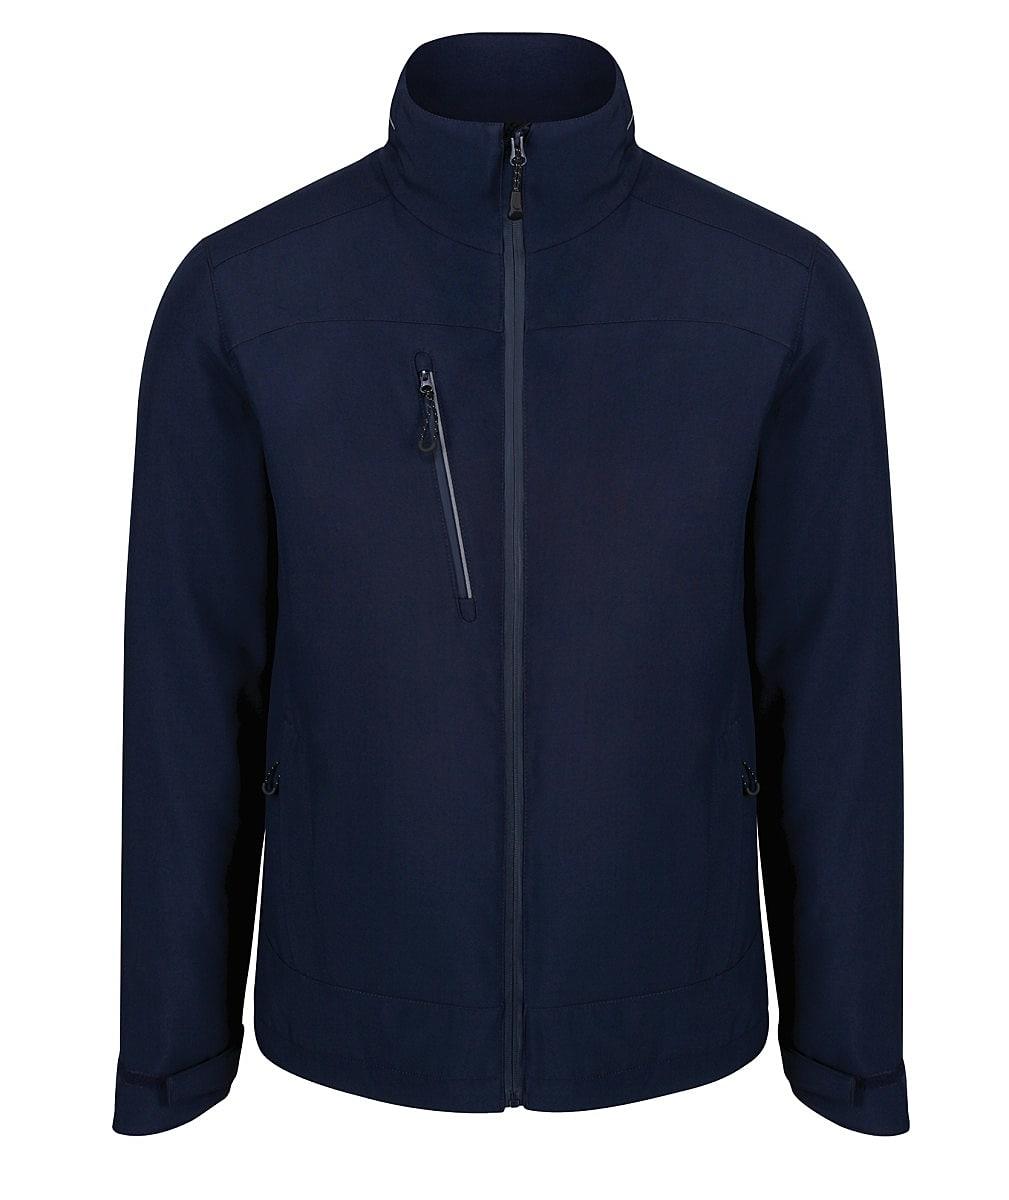 Regatta Bifrost Insulated Jacket in Navy Blue (Product Code: TRA634)